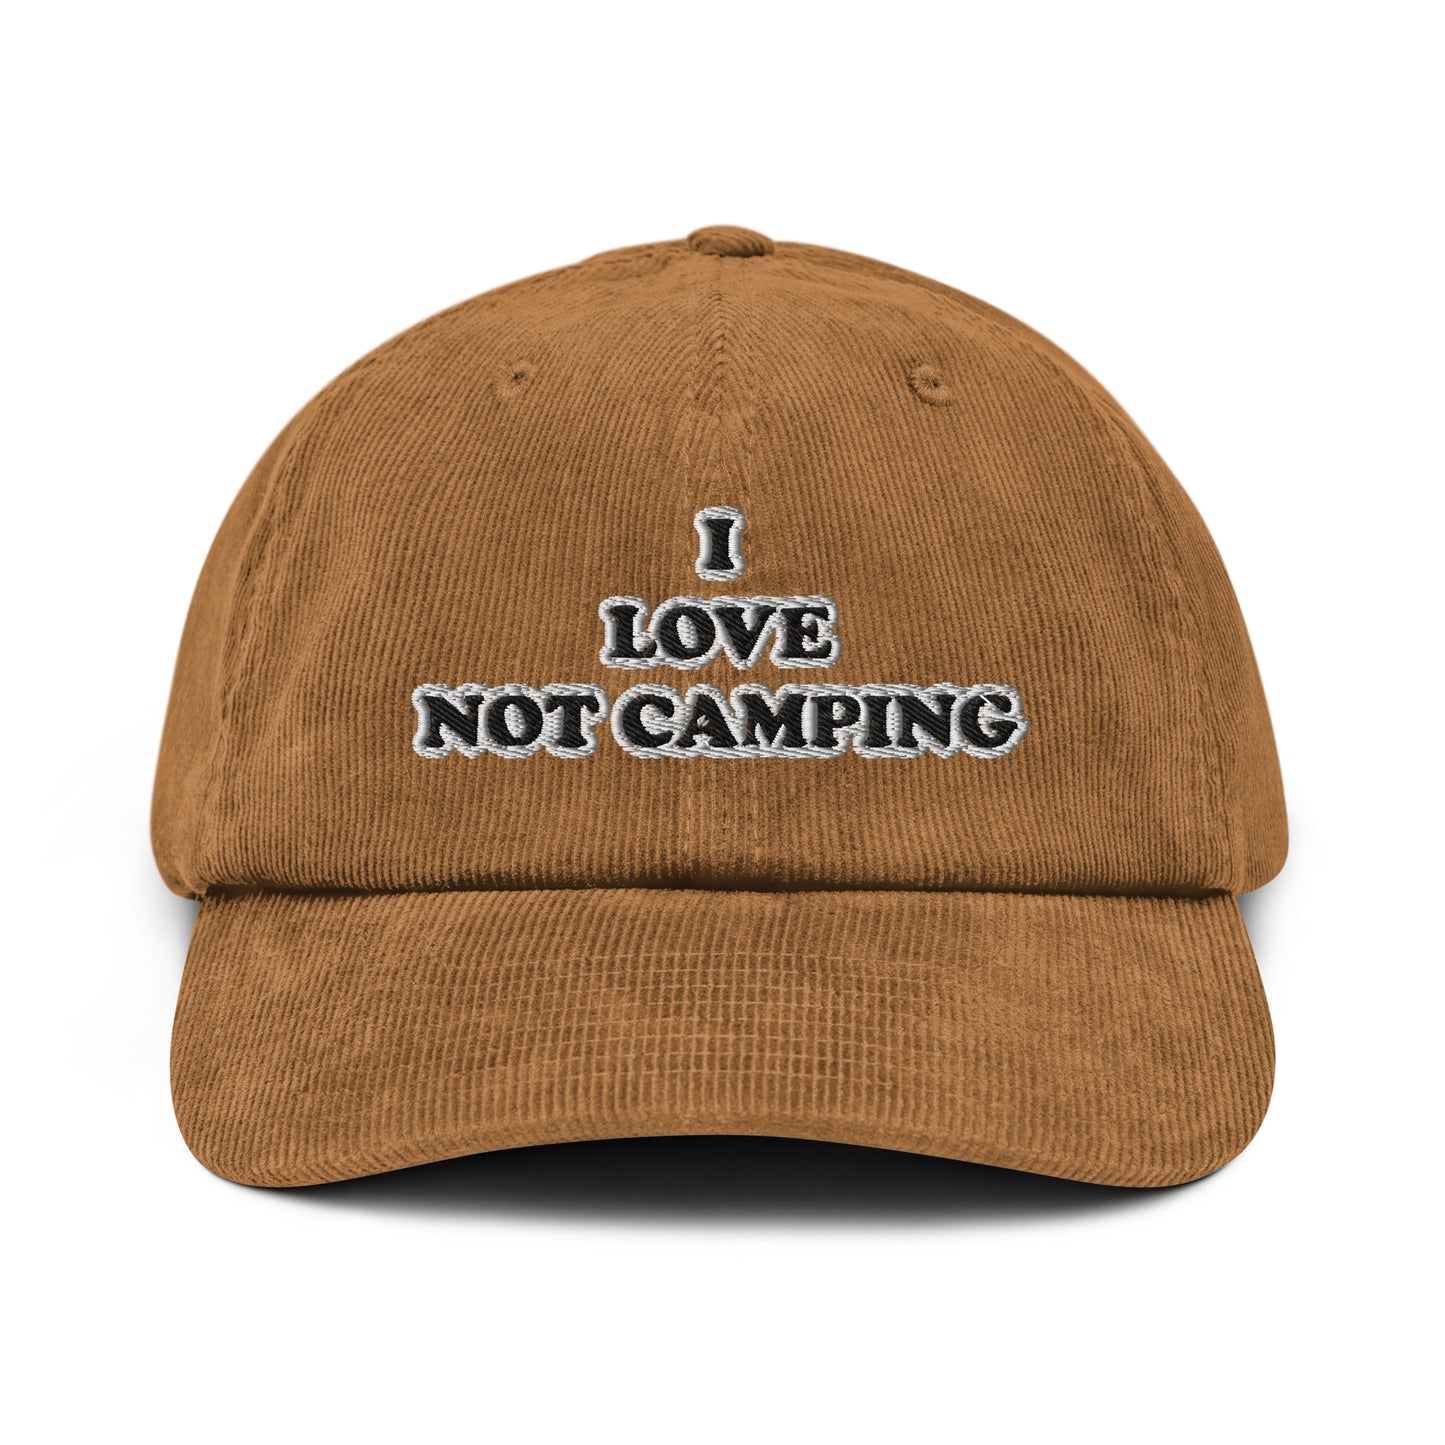 I LOVE NOT CAMPING / Corduroy Edition